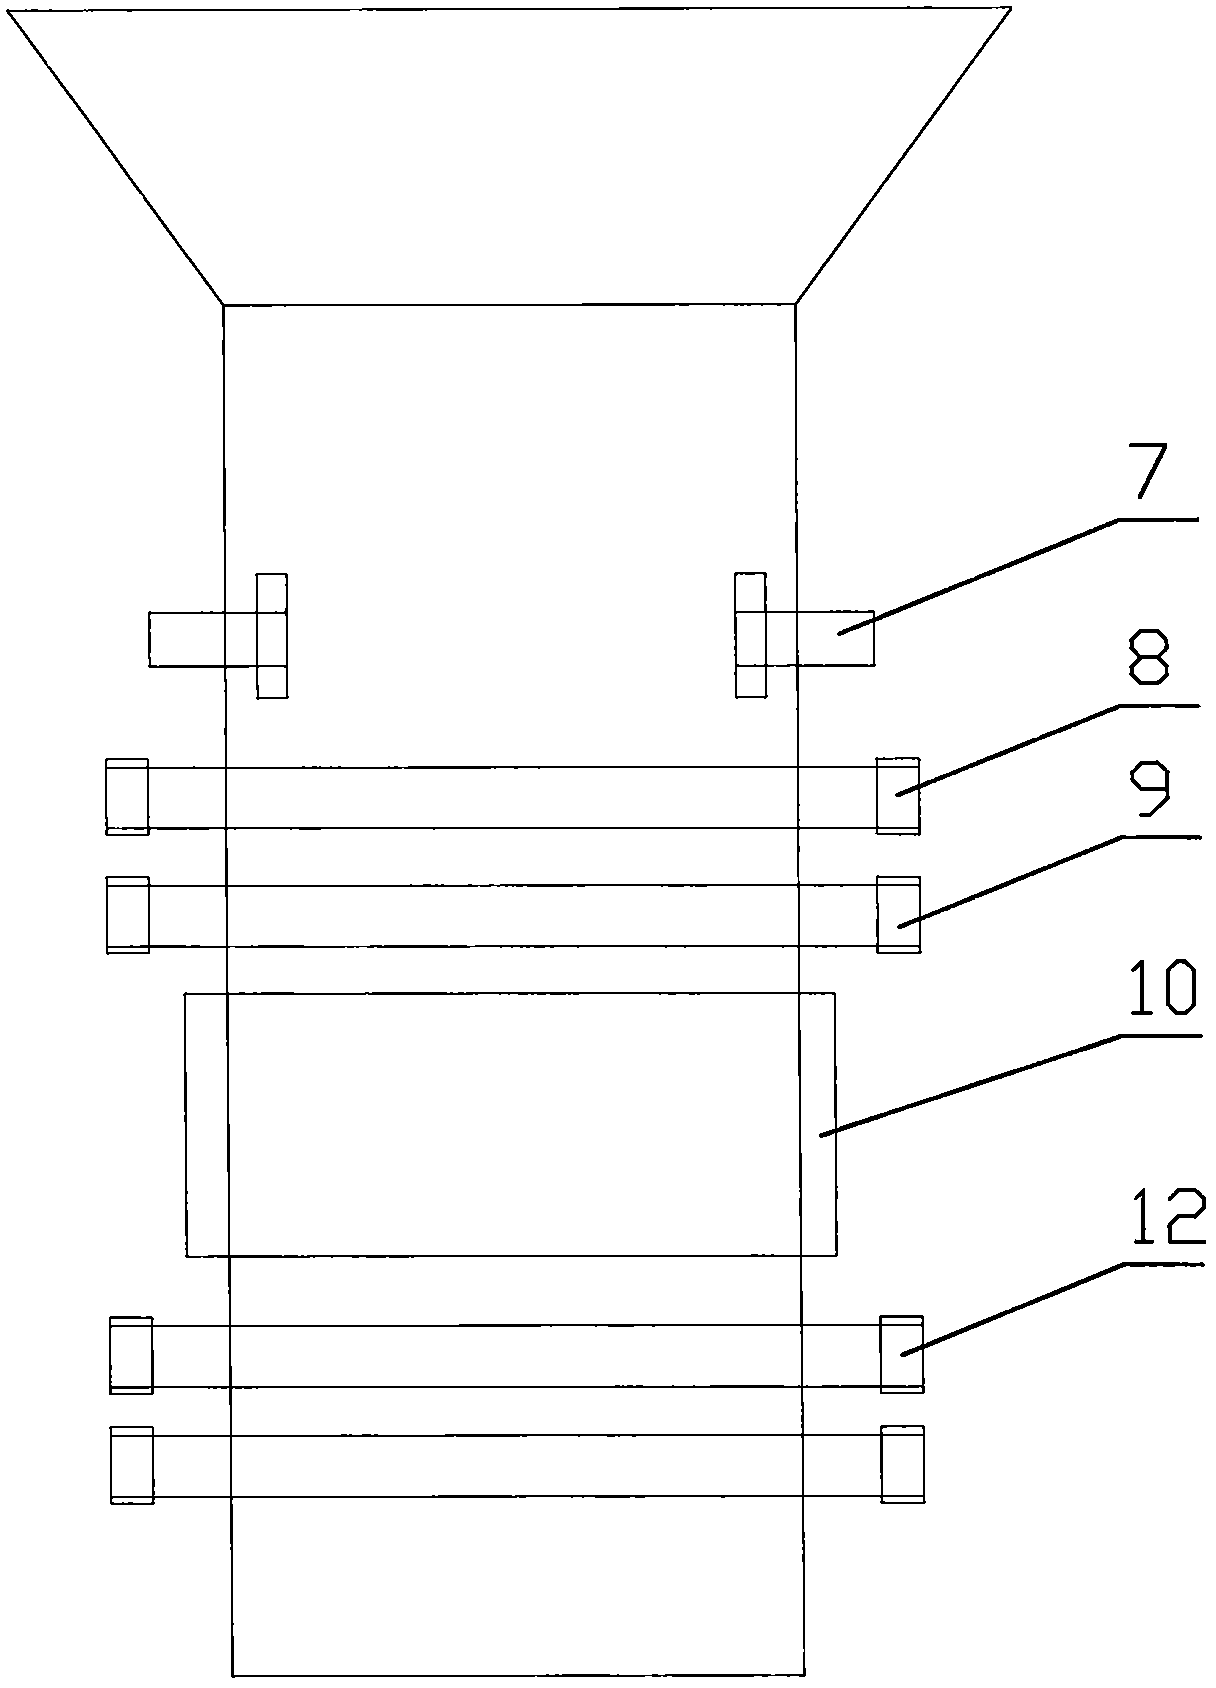 Equipment and method for preparing ultra-thin glass by utilizing glass fiber melting furnace discharge materials